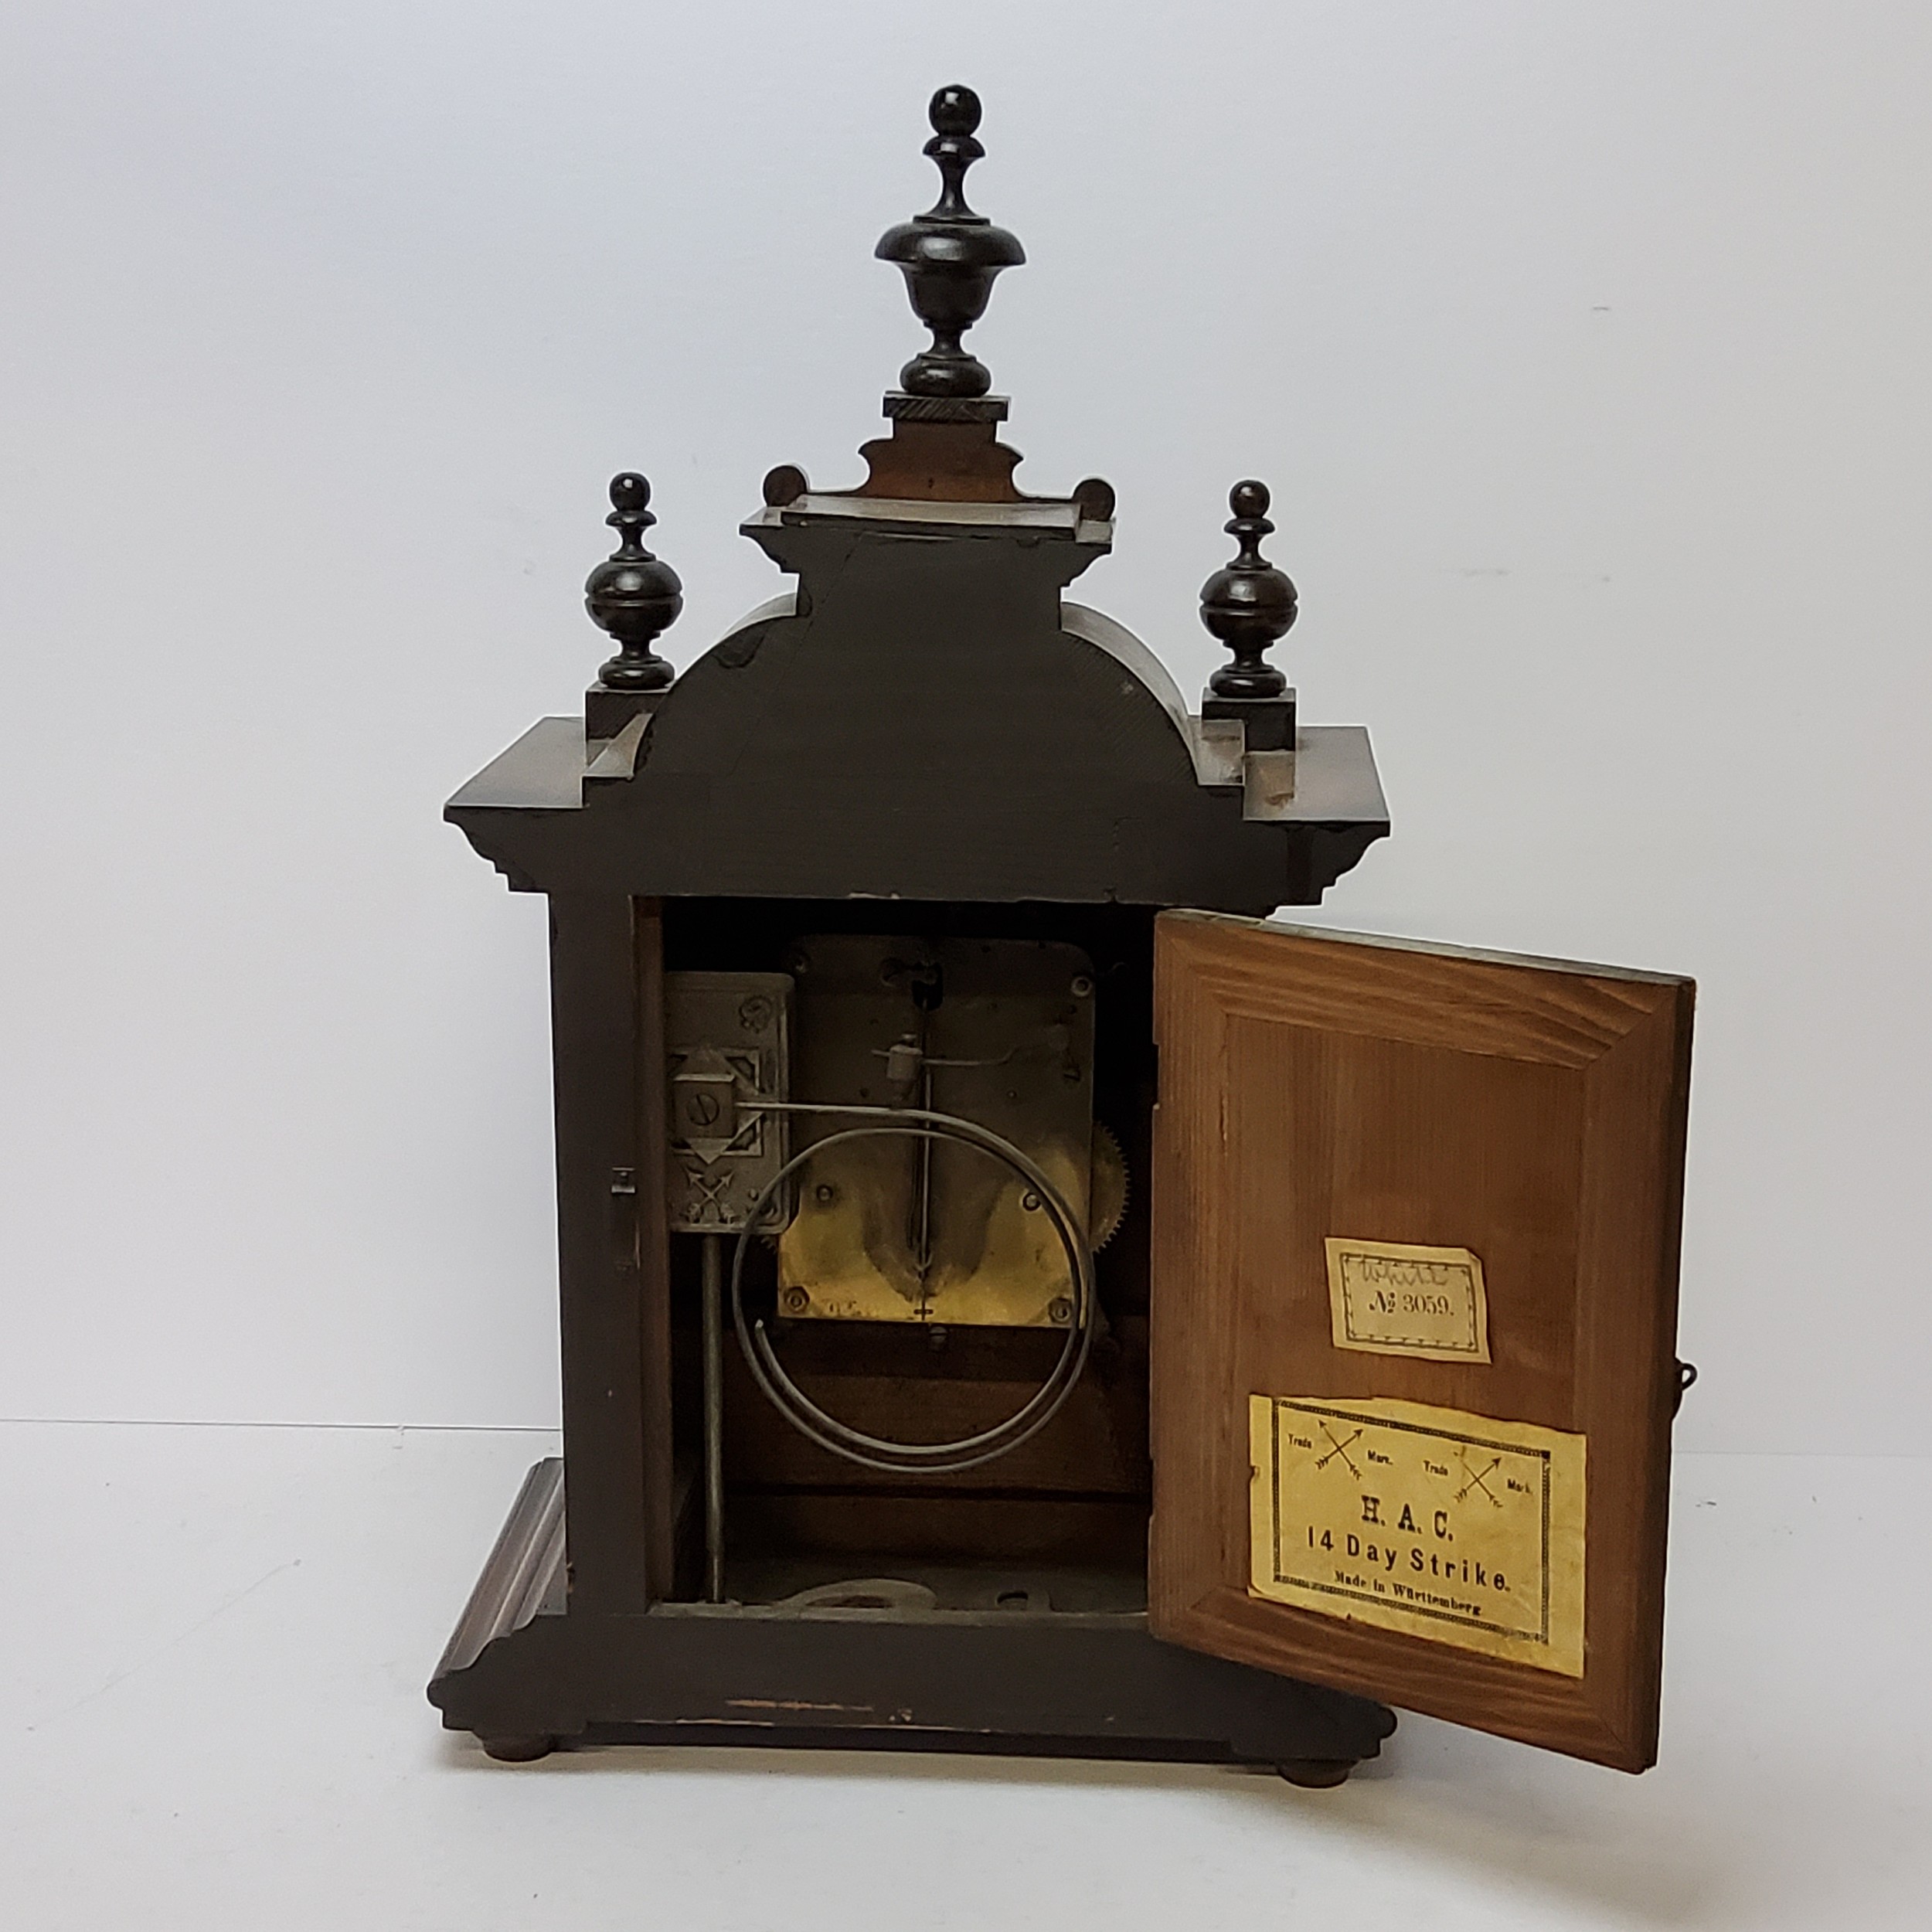 A walnut cased H.A.C. 14 day strike mantel clock, striking on a coiled gong. bevelled glass - Image 3 of 6